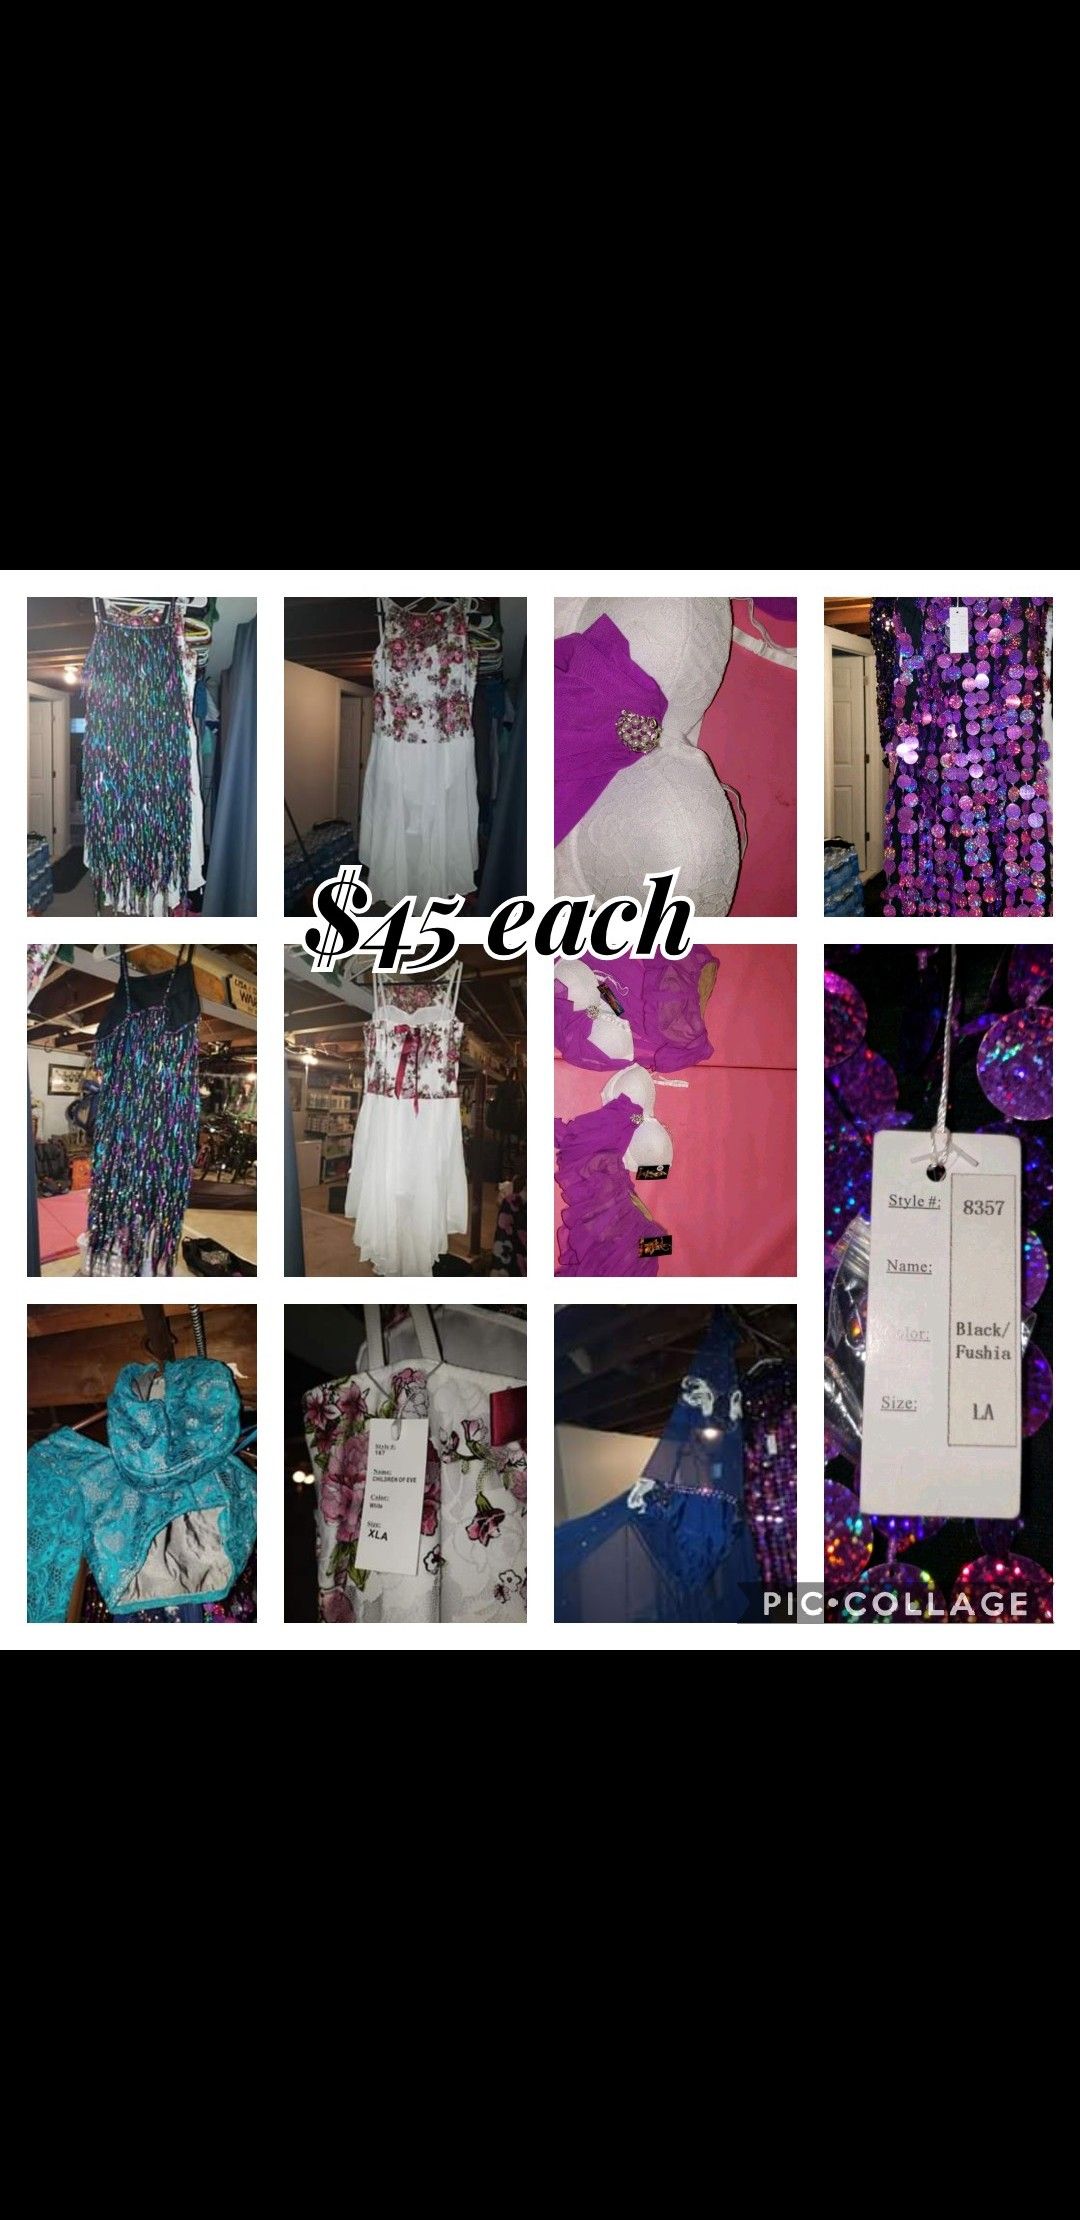 All New dance costumes $45.00 each